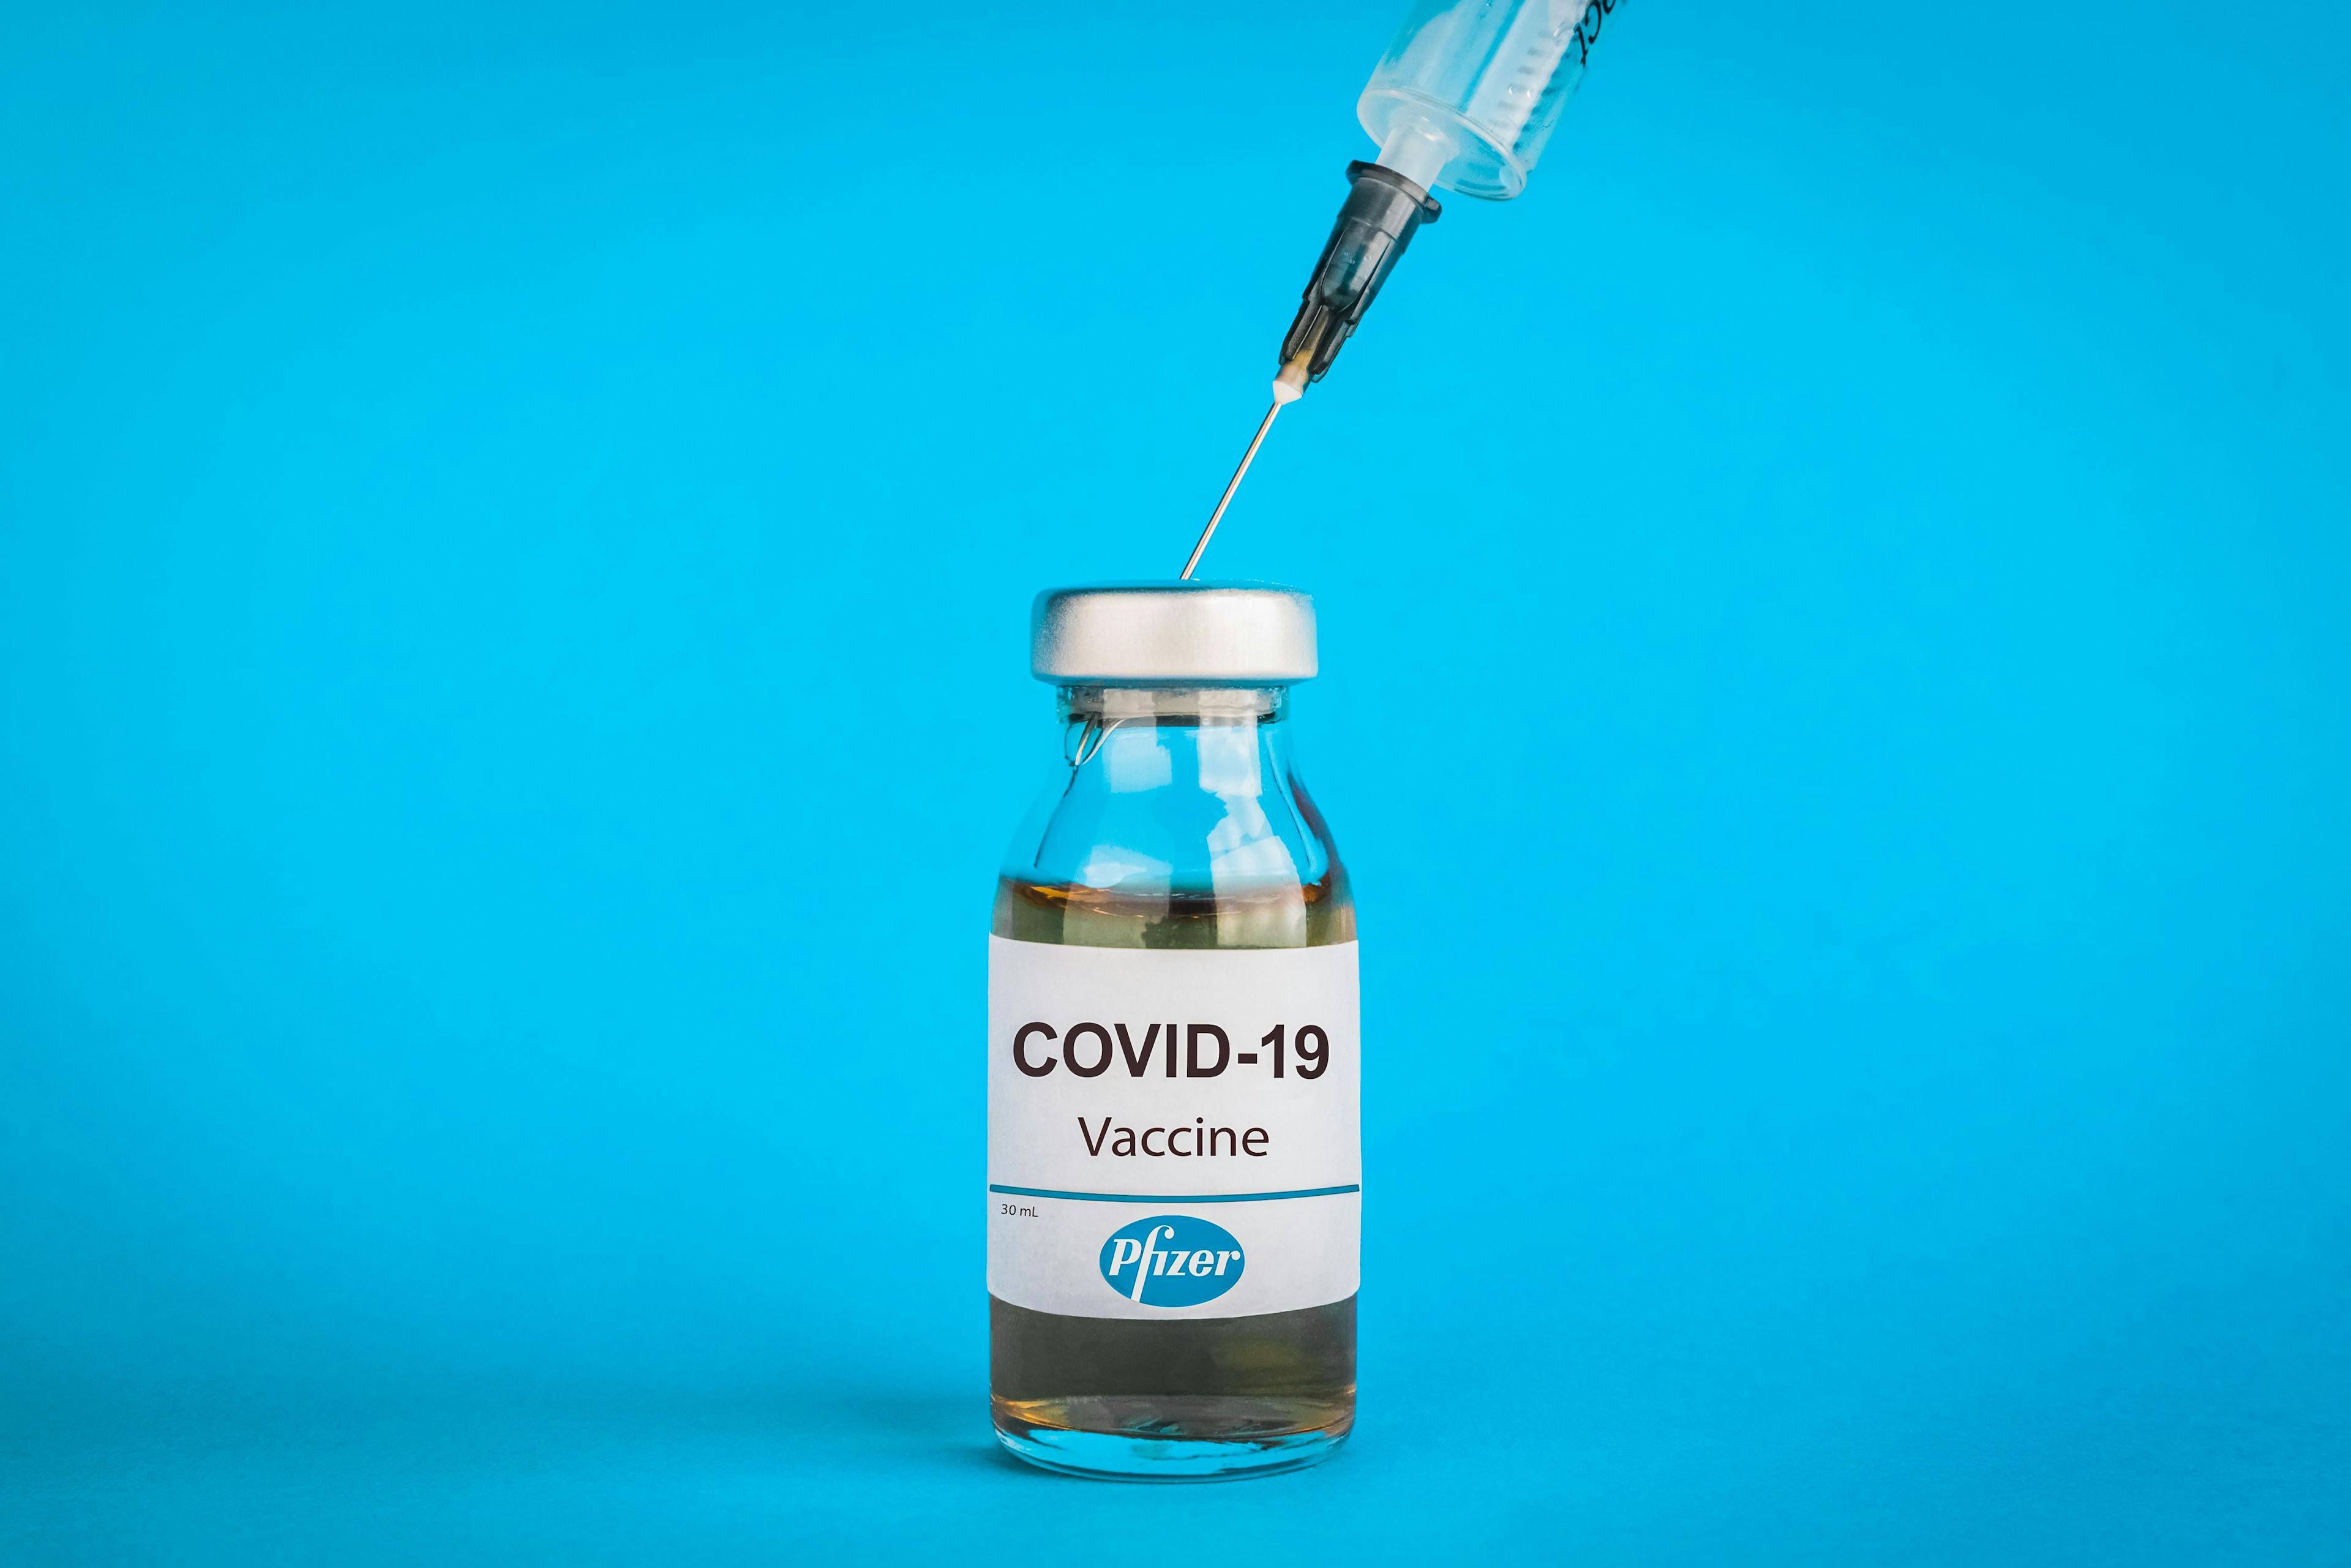 Pfizer’s COVID-19 vaccine shows more than 90 percent efficacy